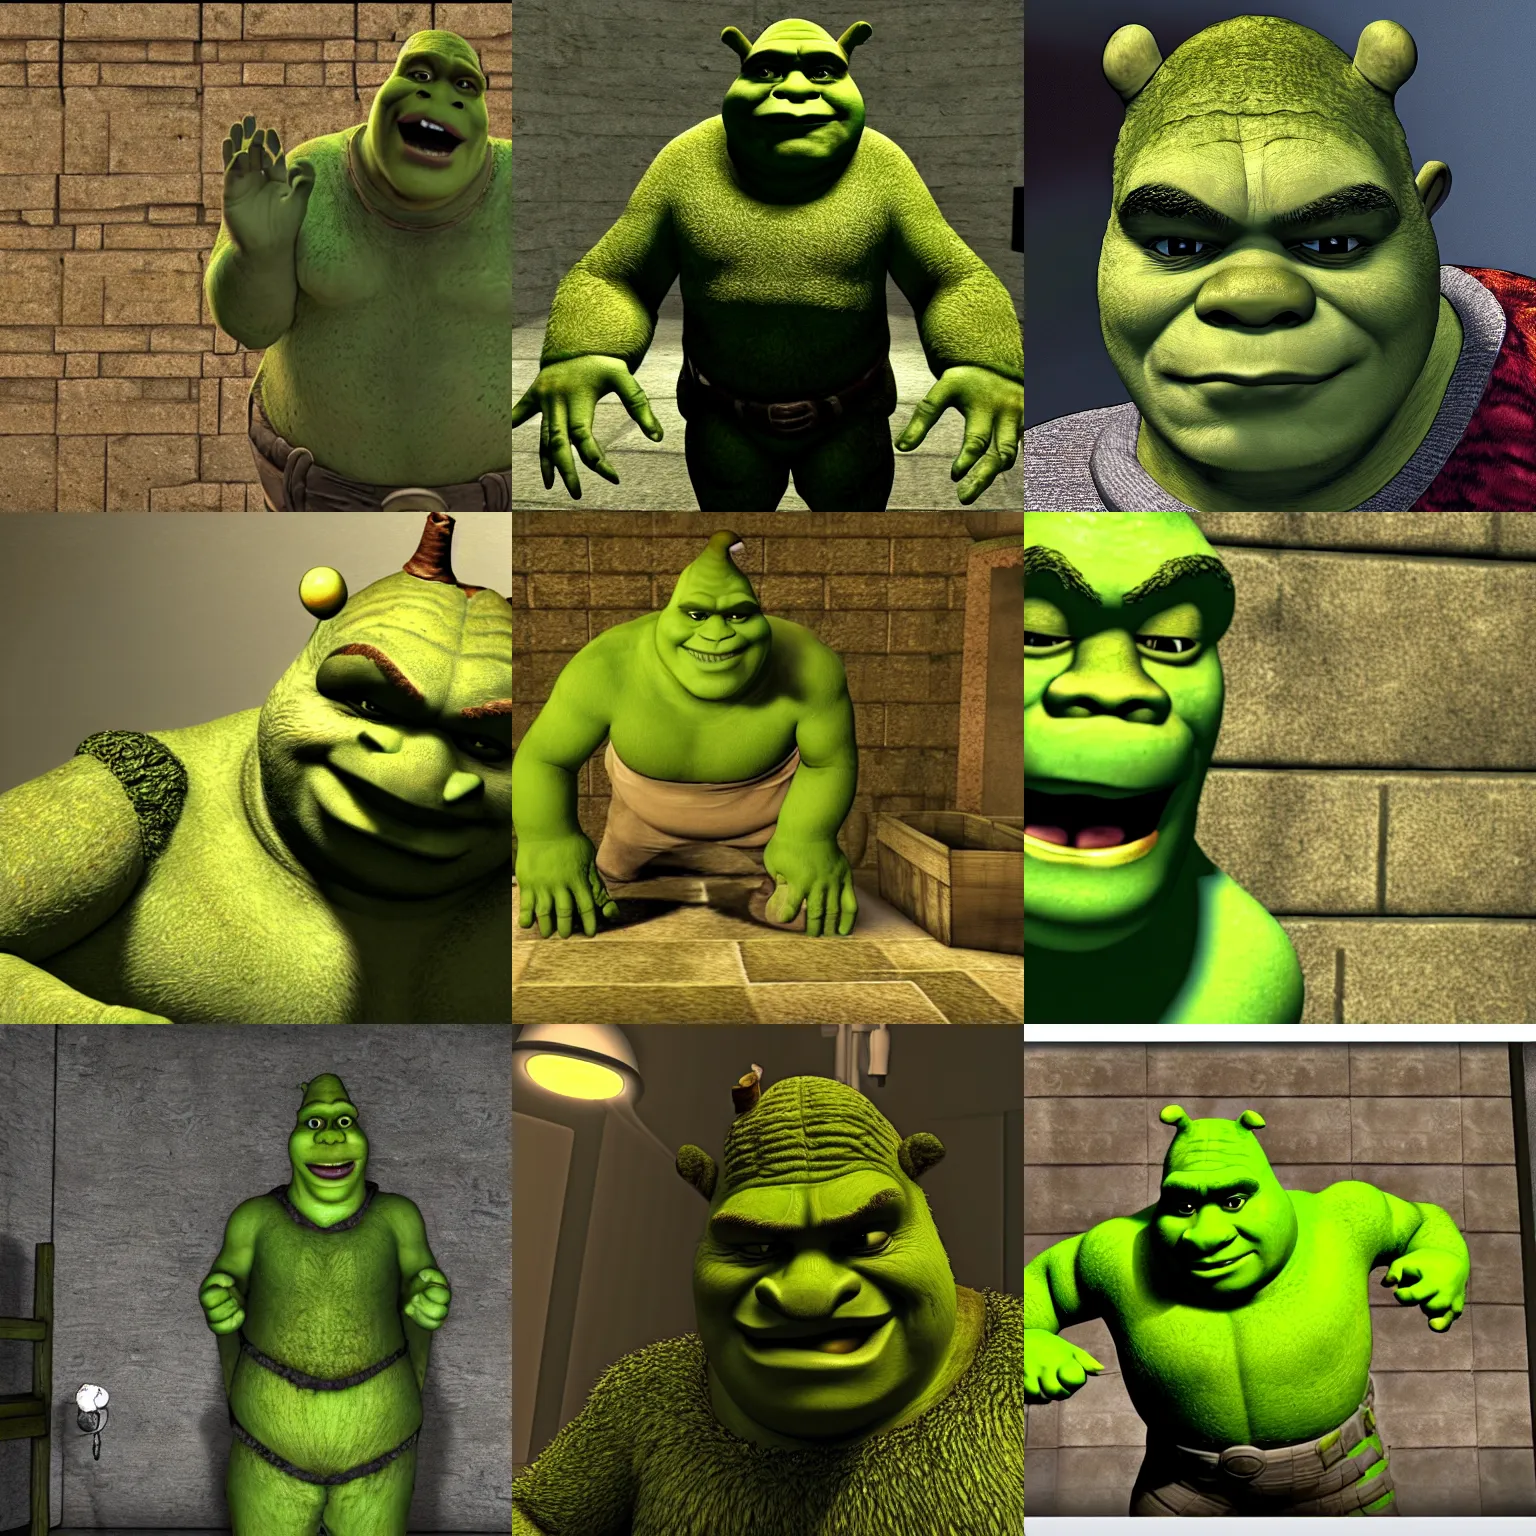 Prompt: SCP screenshot of shrek as a experiment by the SCP Foundation